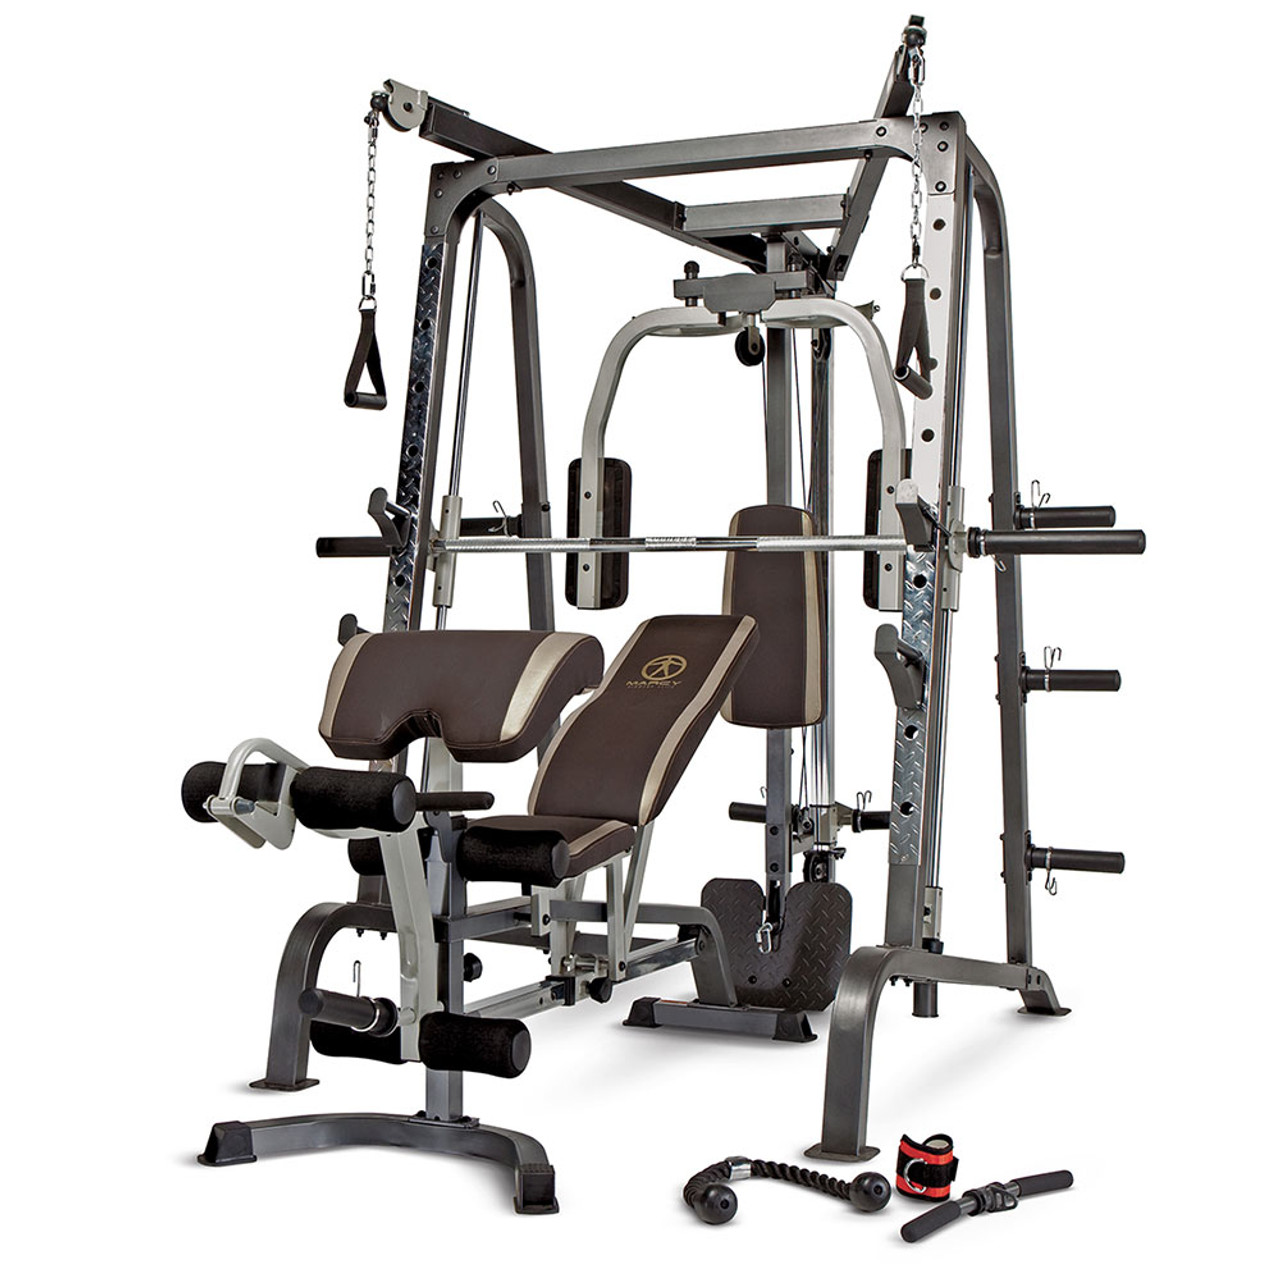 The Best Leg Exercise Machines and Arm Exercise Machines at the Gym